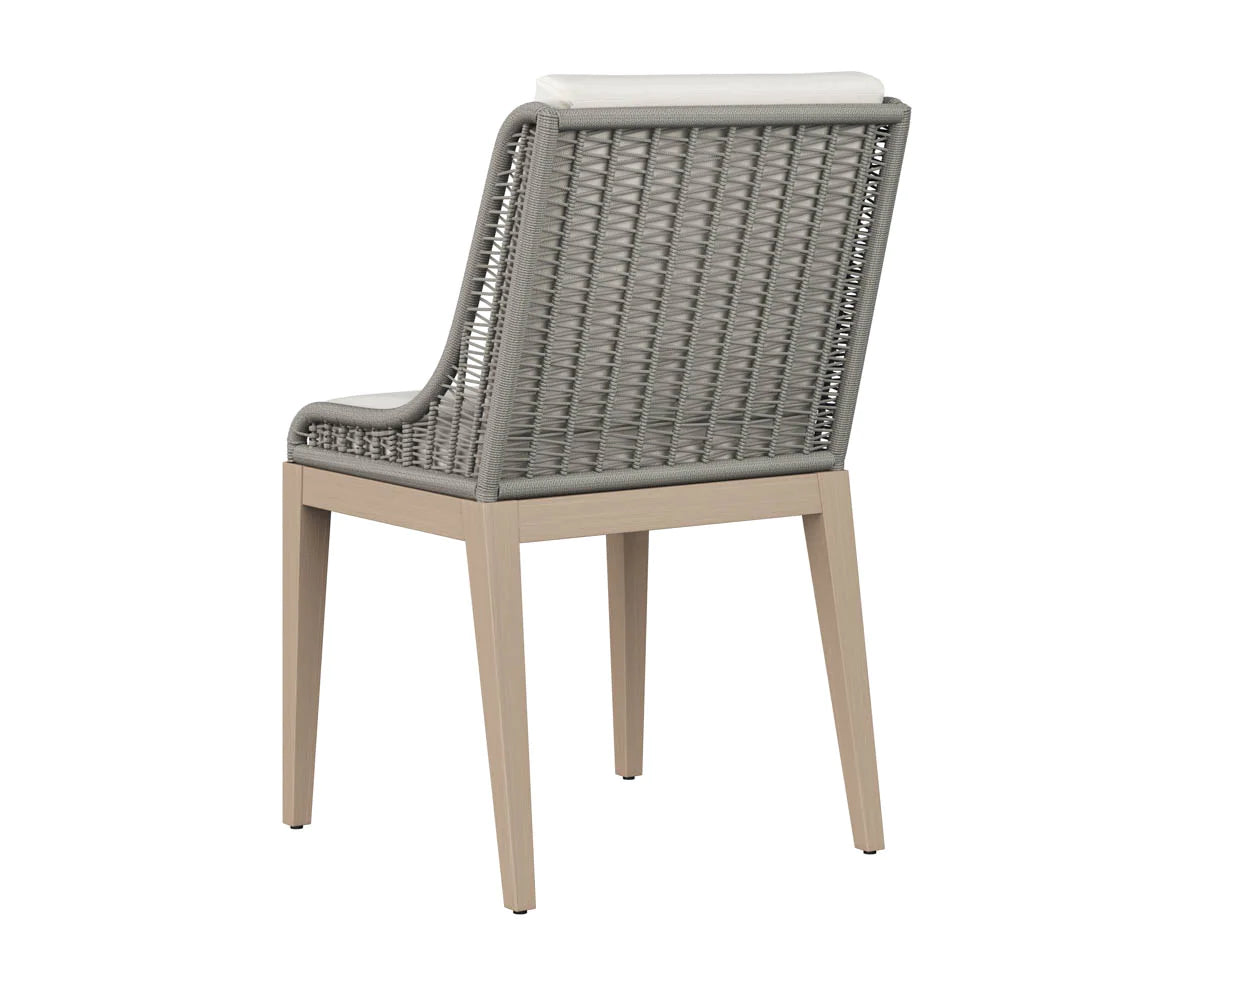 Sorrento Dining Chair - Drift Brown (Patio/Outdoor)